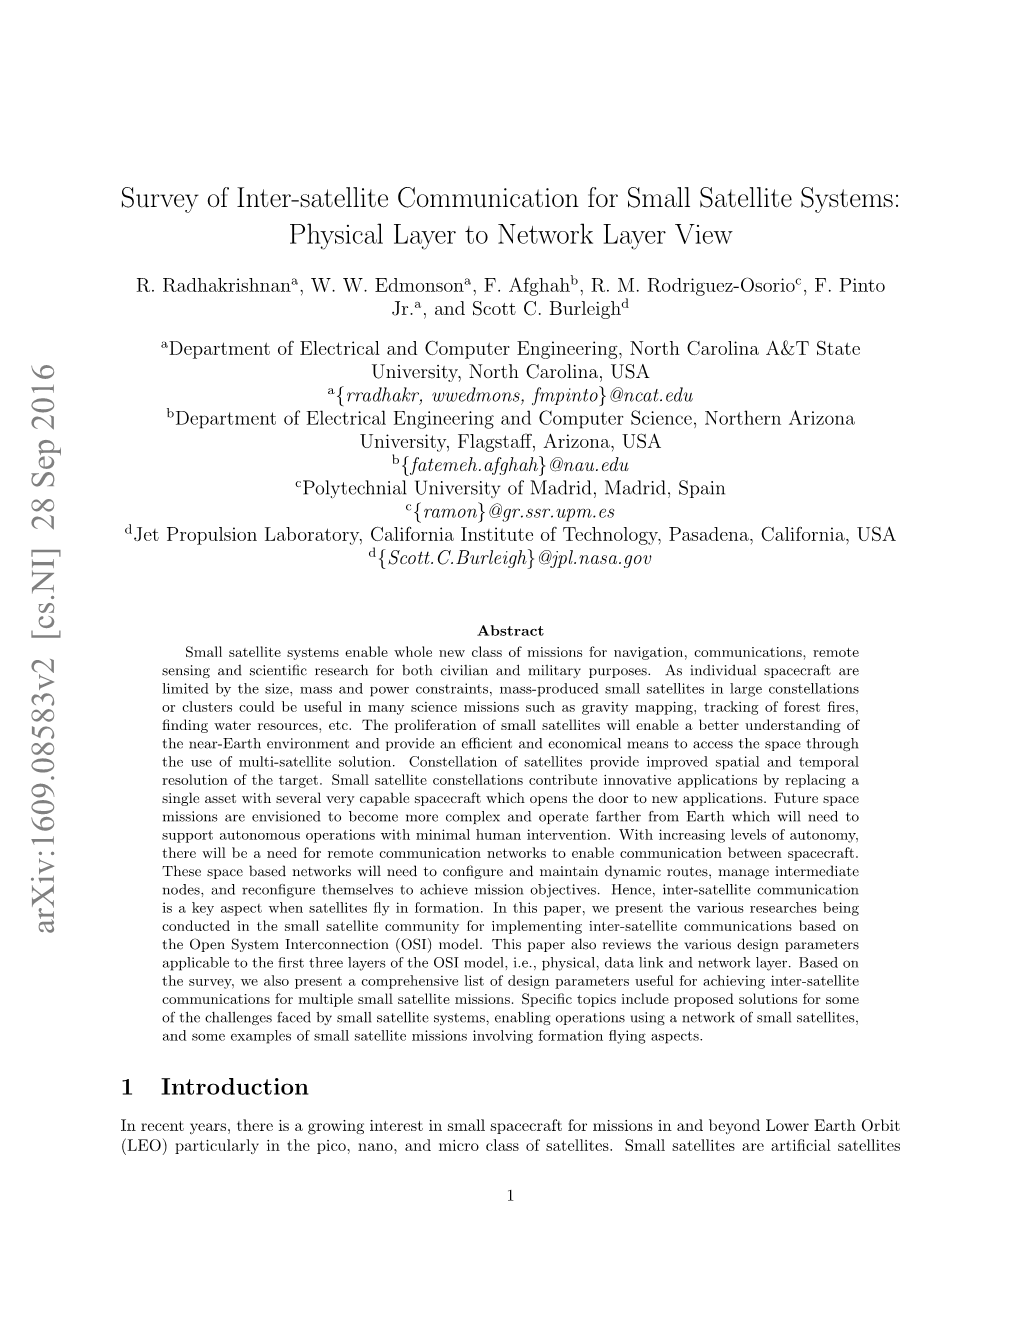 Survey of Inter-Satellite Communication for Small Satellite Systems: Physical Layer to Network Layer View